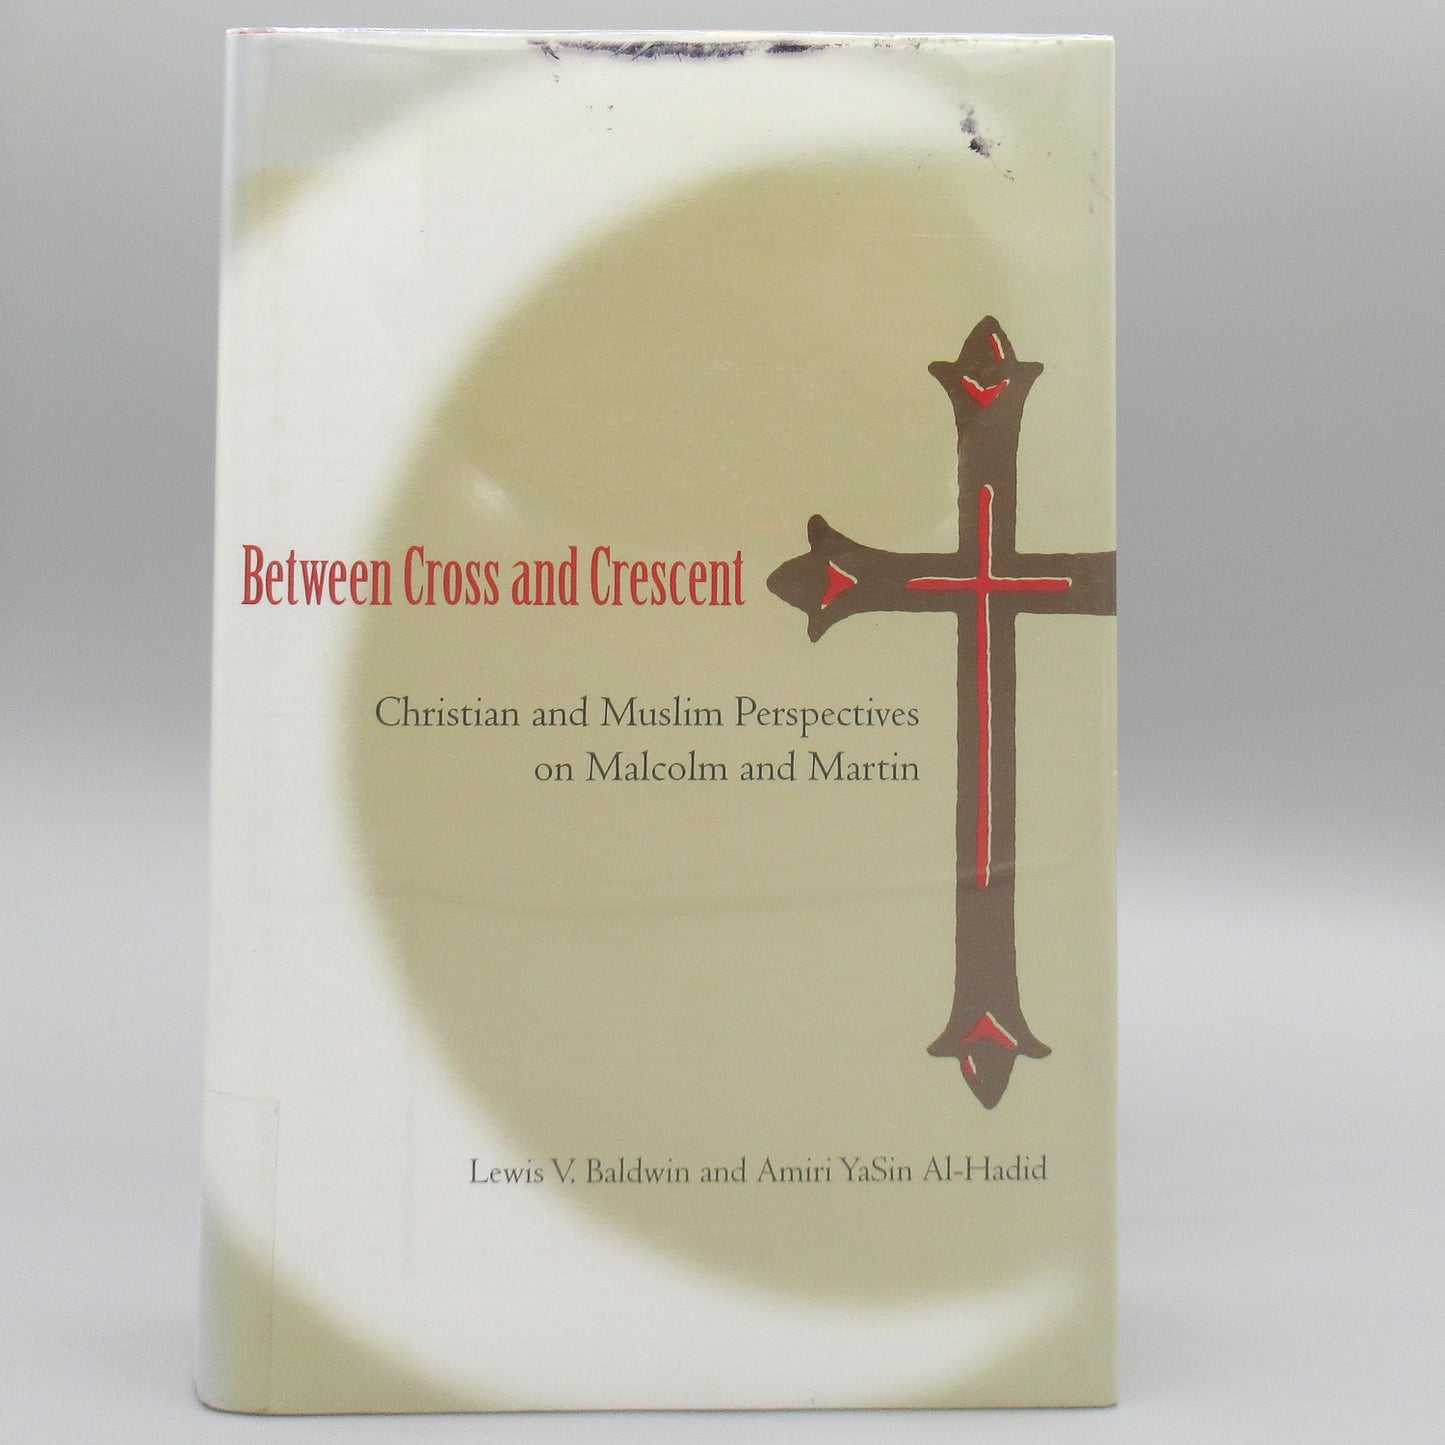 Between Cross and Crescent: Christian and Muslim Perspectives on Malcolm and Martin